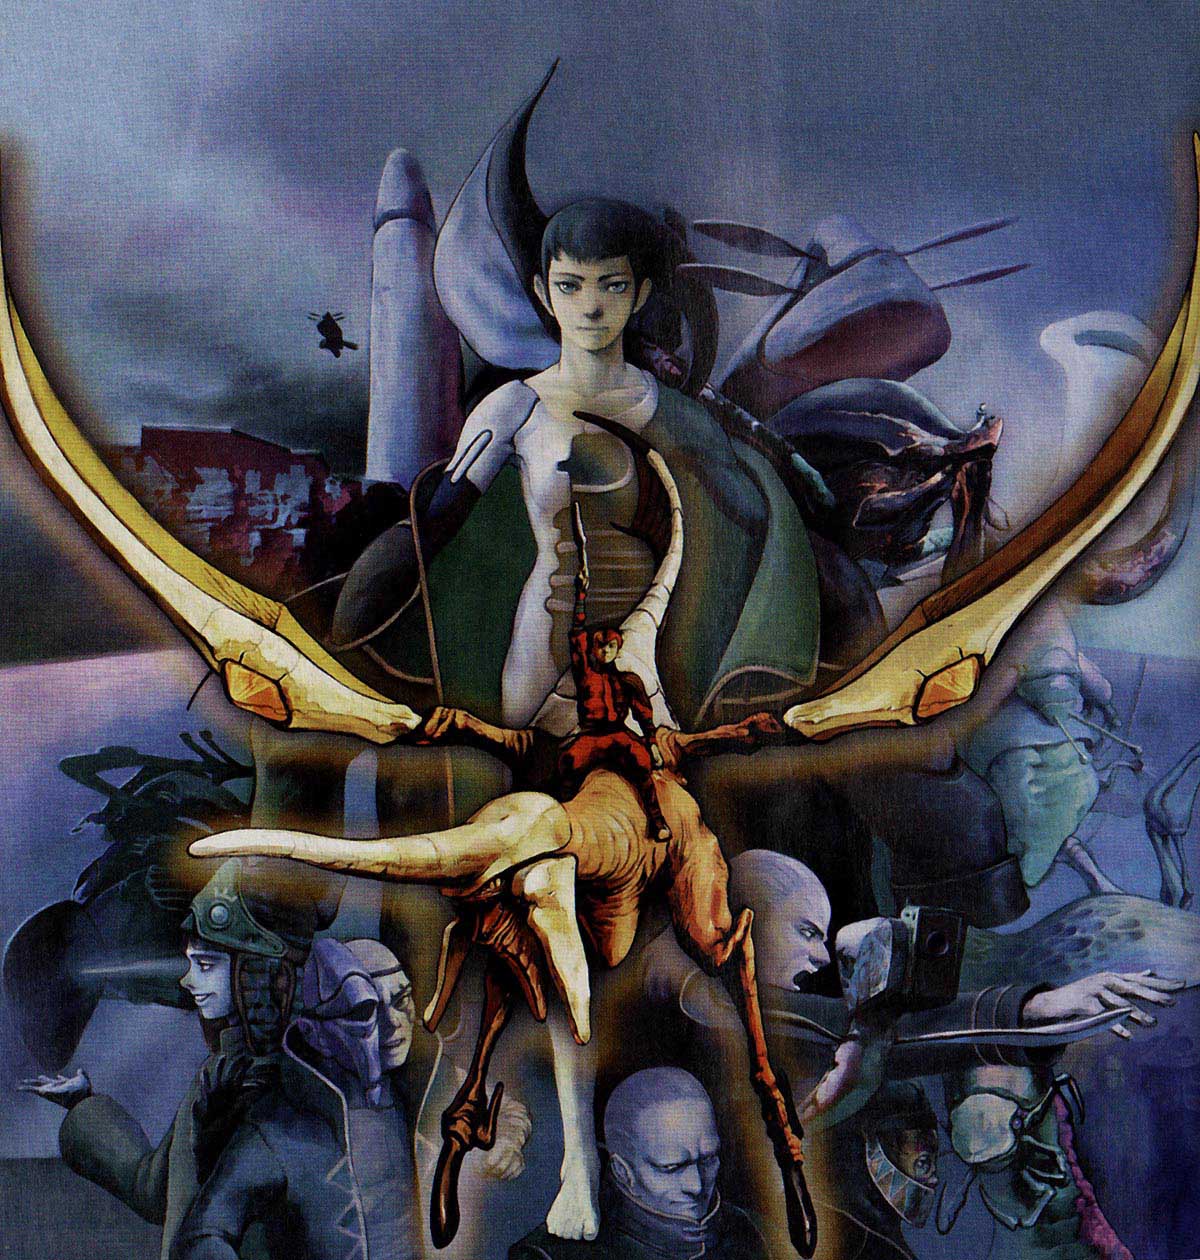 Panzer Dragoon Saga, which is the greatest JRPG ever as far as I'm concerned